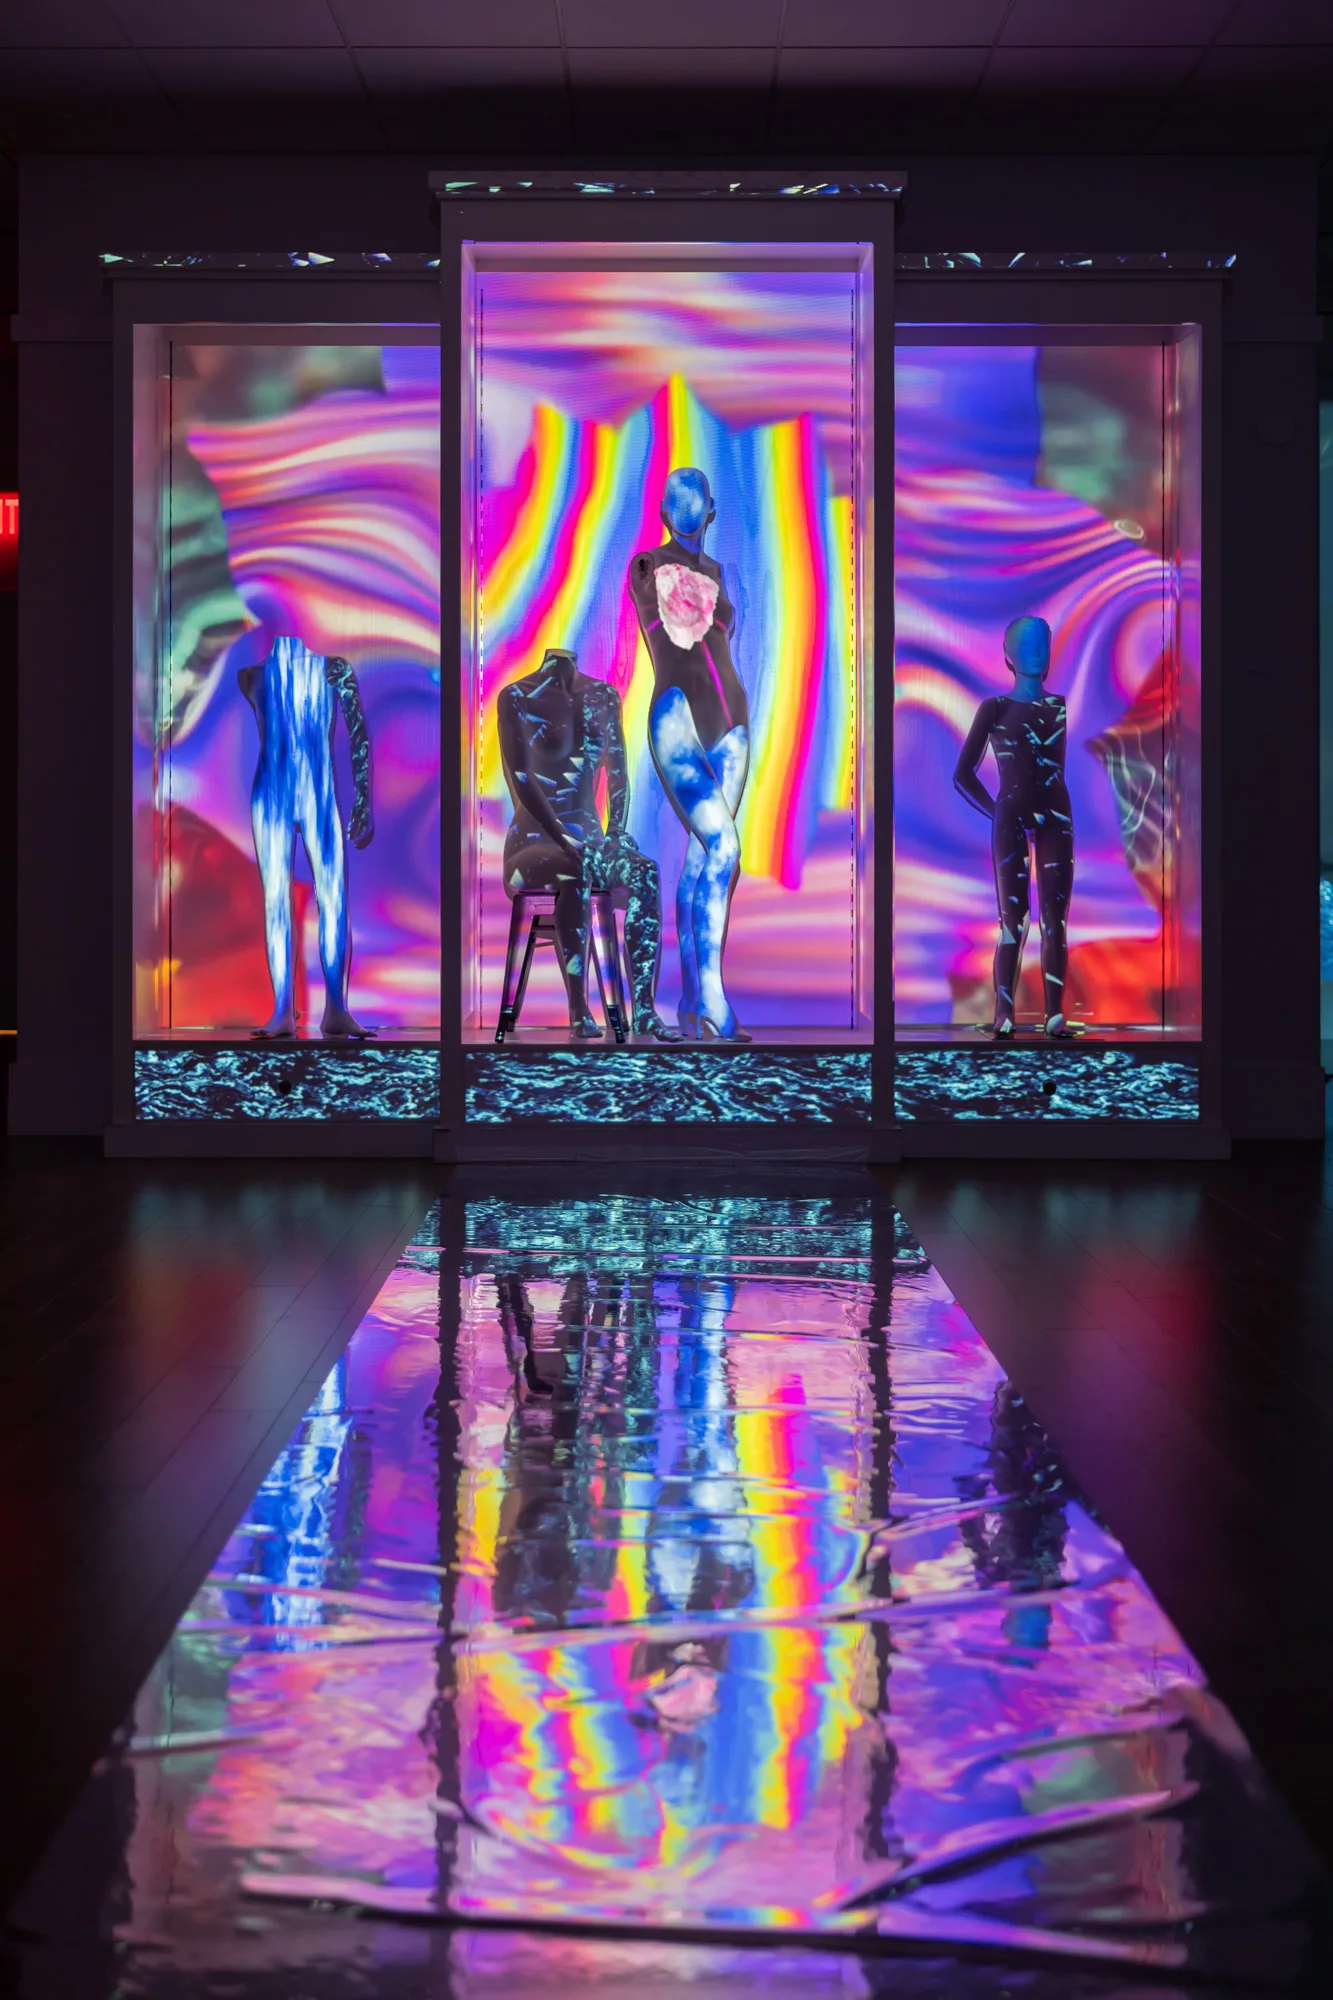 A display case, split into three sections. Four mannequins stand in the case - one in each of the side sections, and two (one standing and one sitting) are in the middle section. A shiny material is placed on the ground like a runway. A rainbow colored video is projection mapped onto the display case and mannequins.